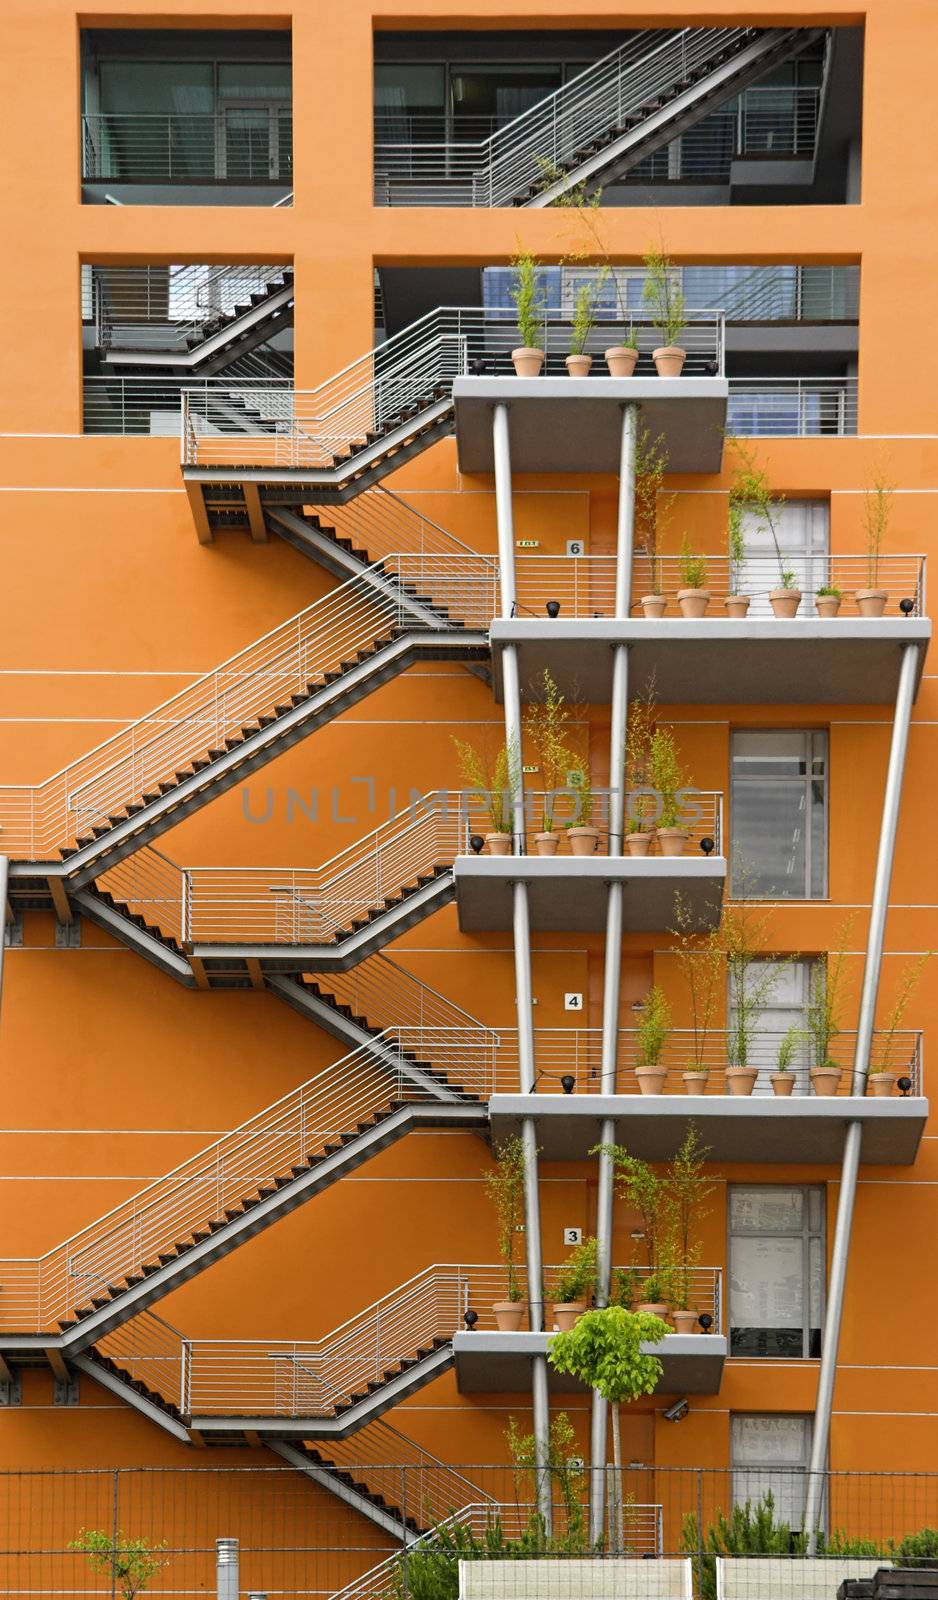 European modern building with stairs and a nice orange color